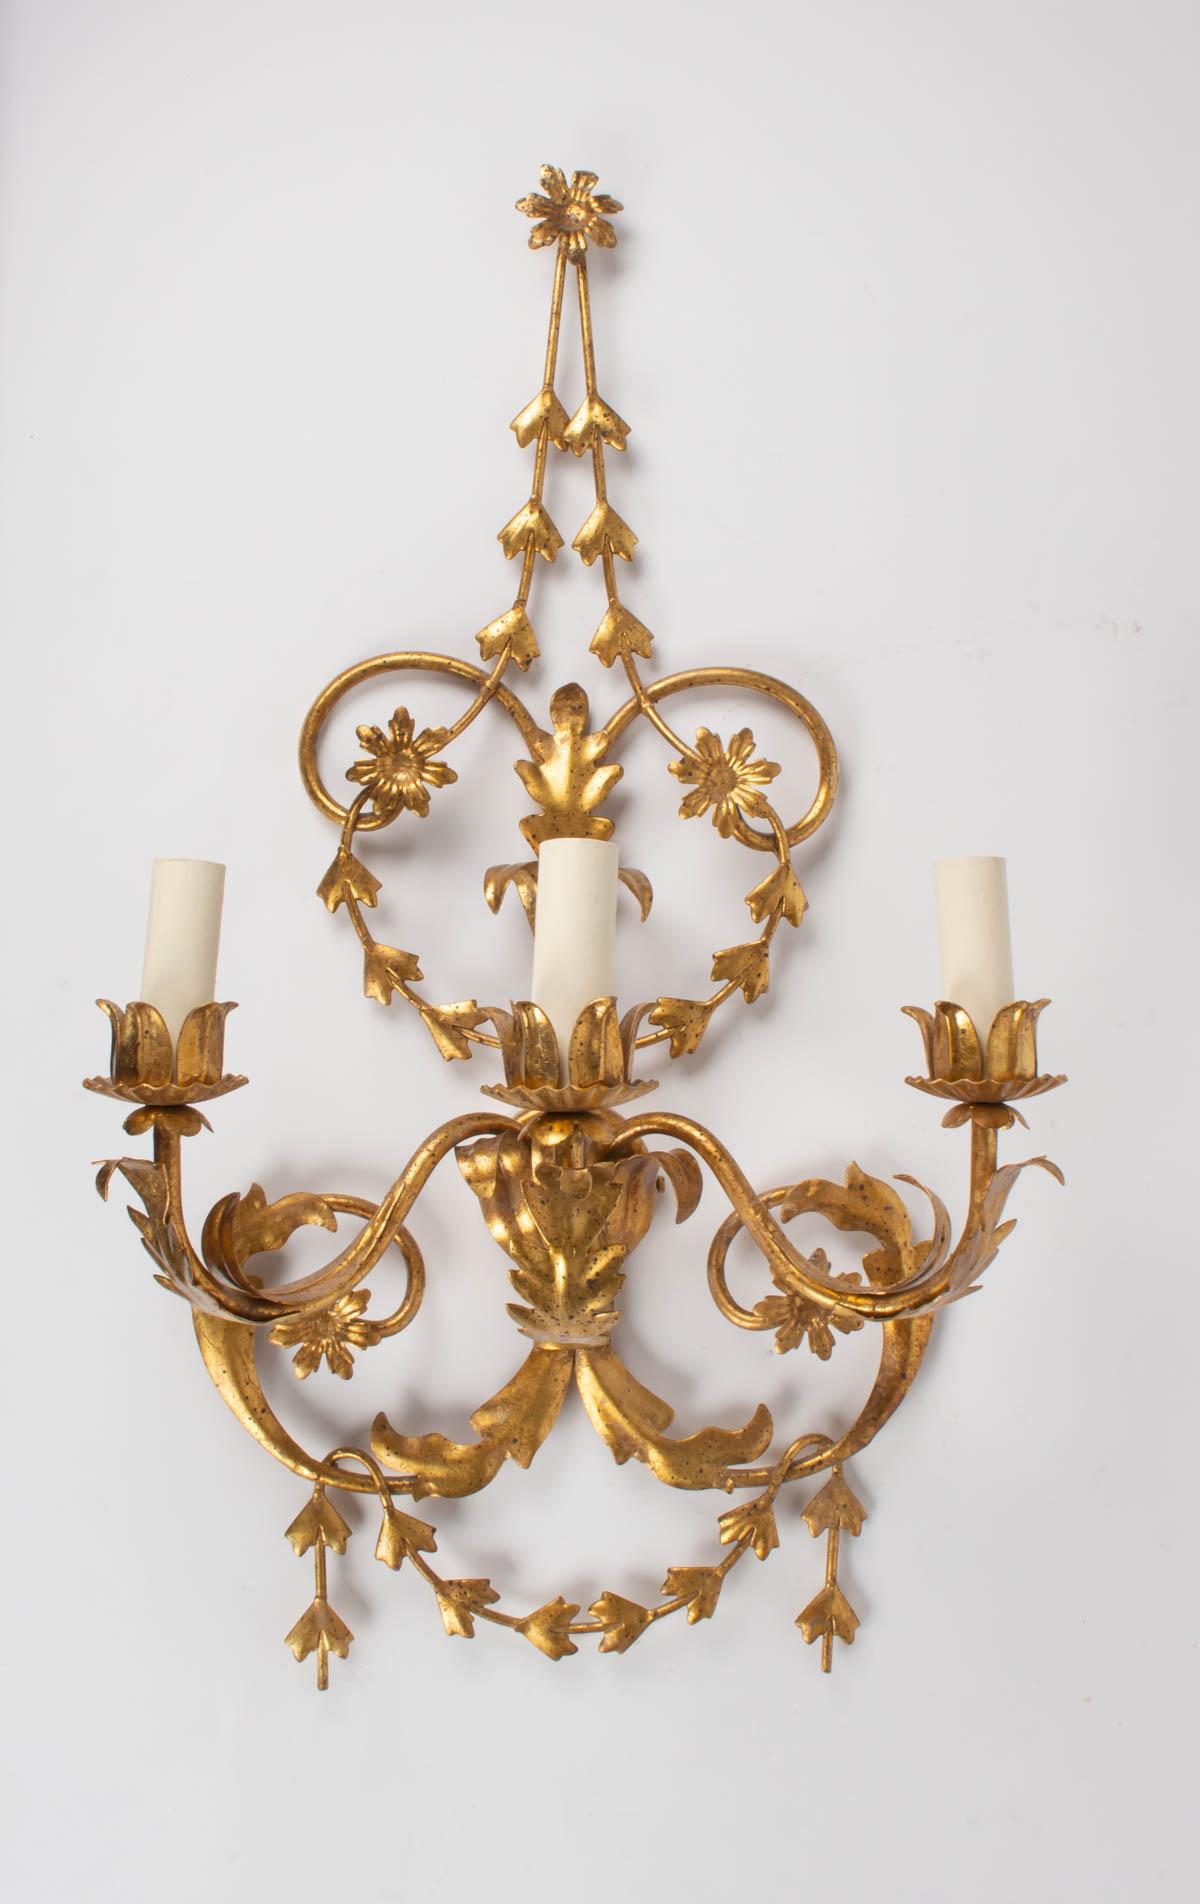 These 3 elegant sconces inspired by the Louis XVI style feature lovely garlands of flowers and foliage, with a beautiful gilded patina. They have been designed by the Maison FlorArt in the 1960s 
3 bulbs per sconces.